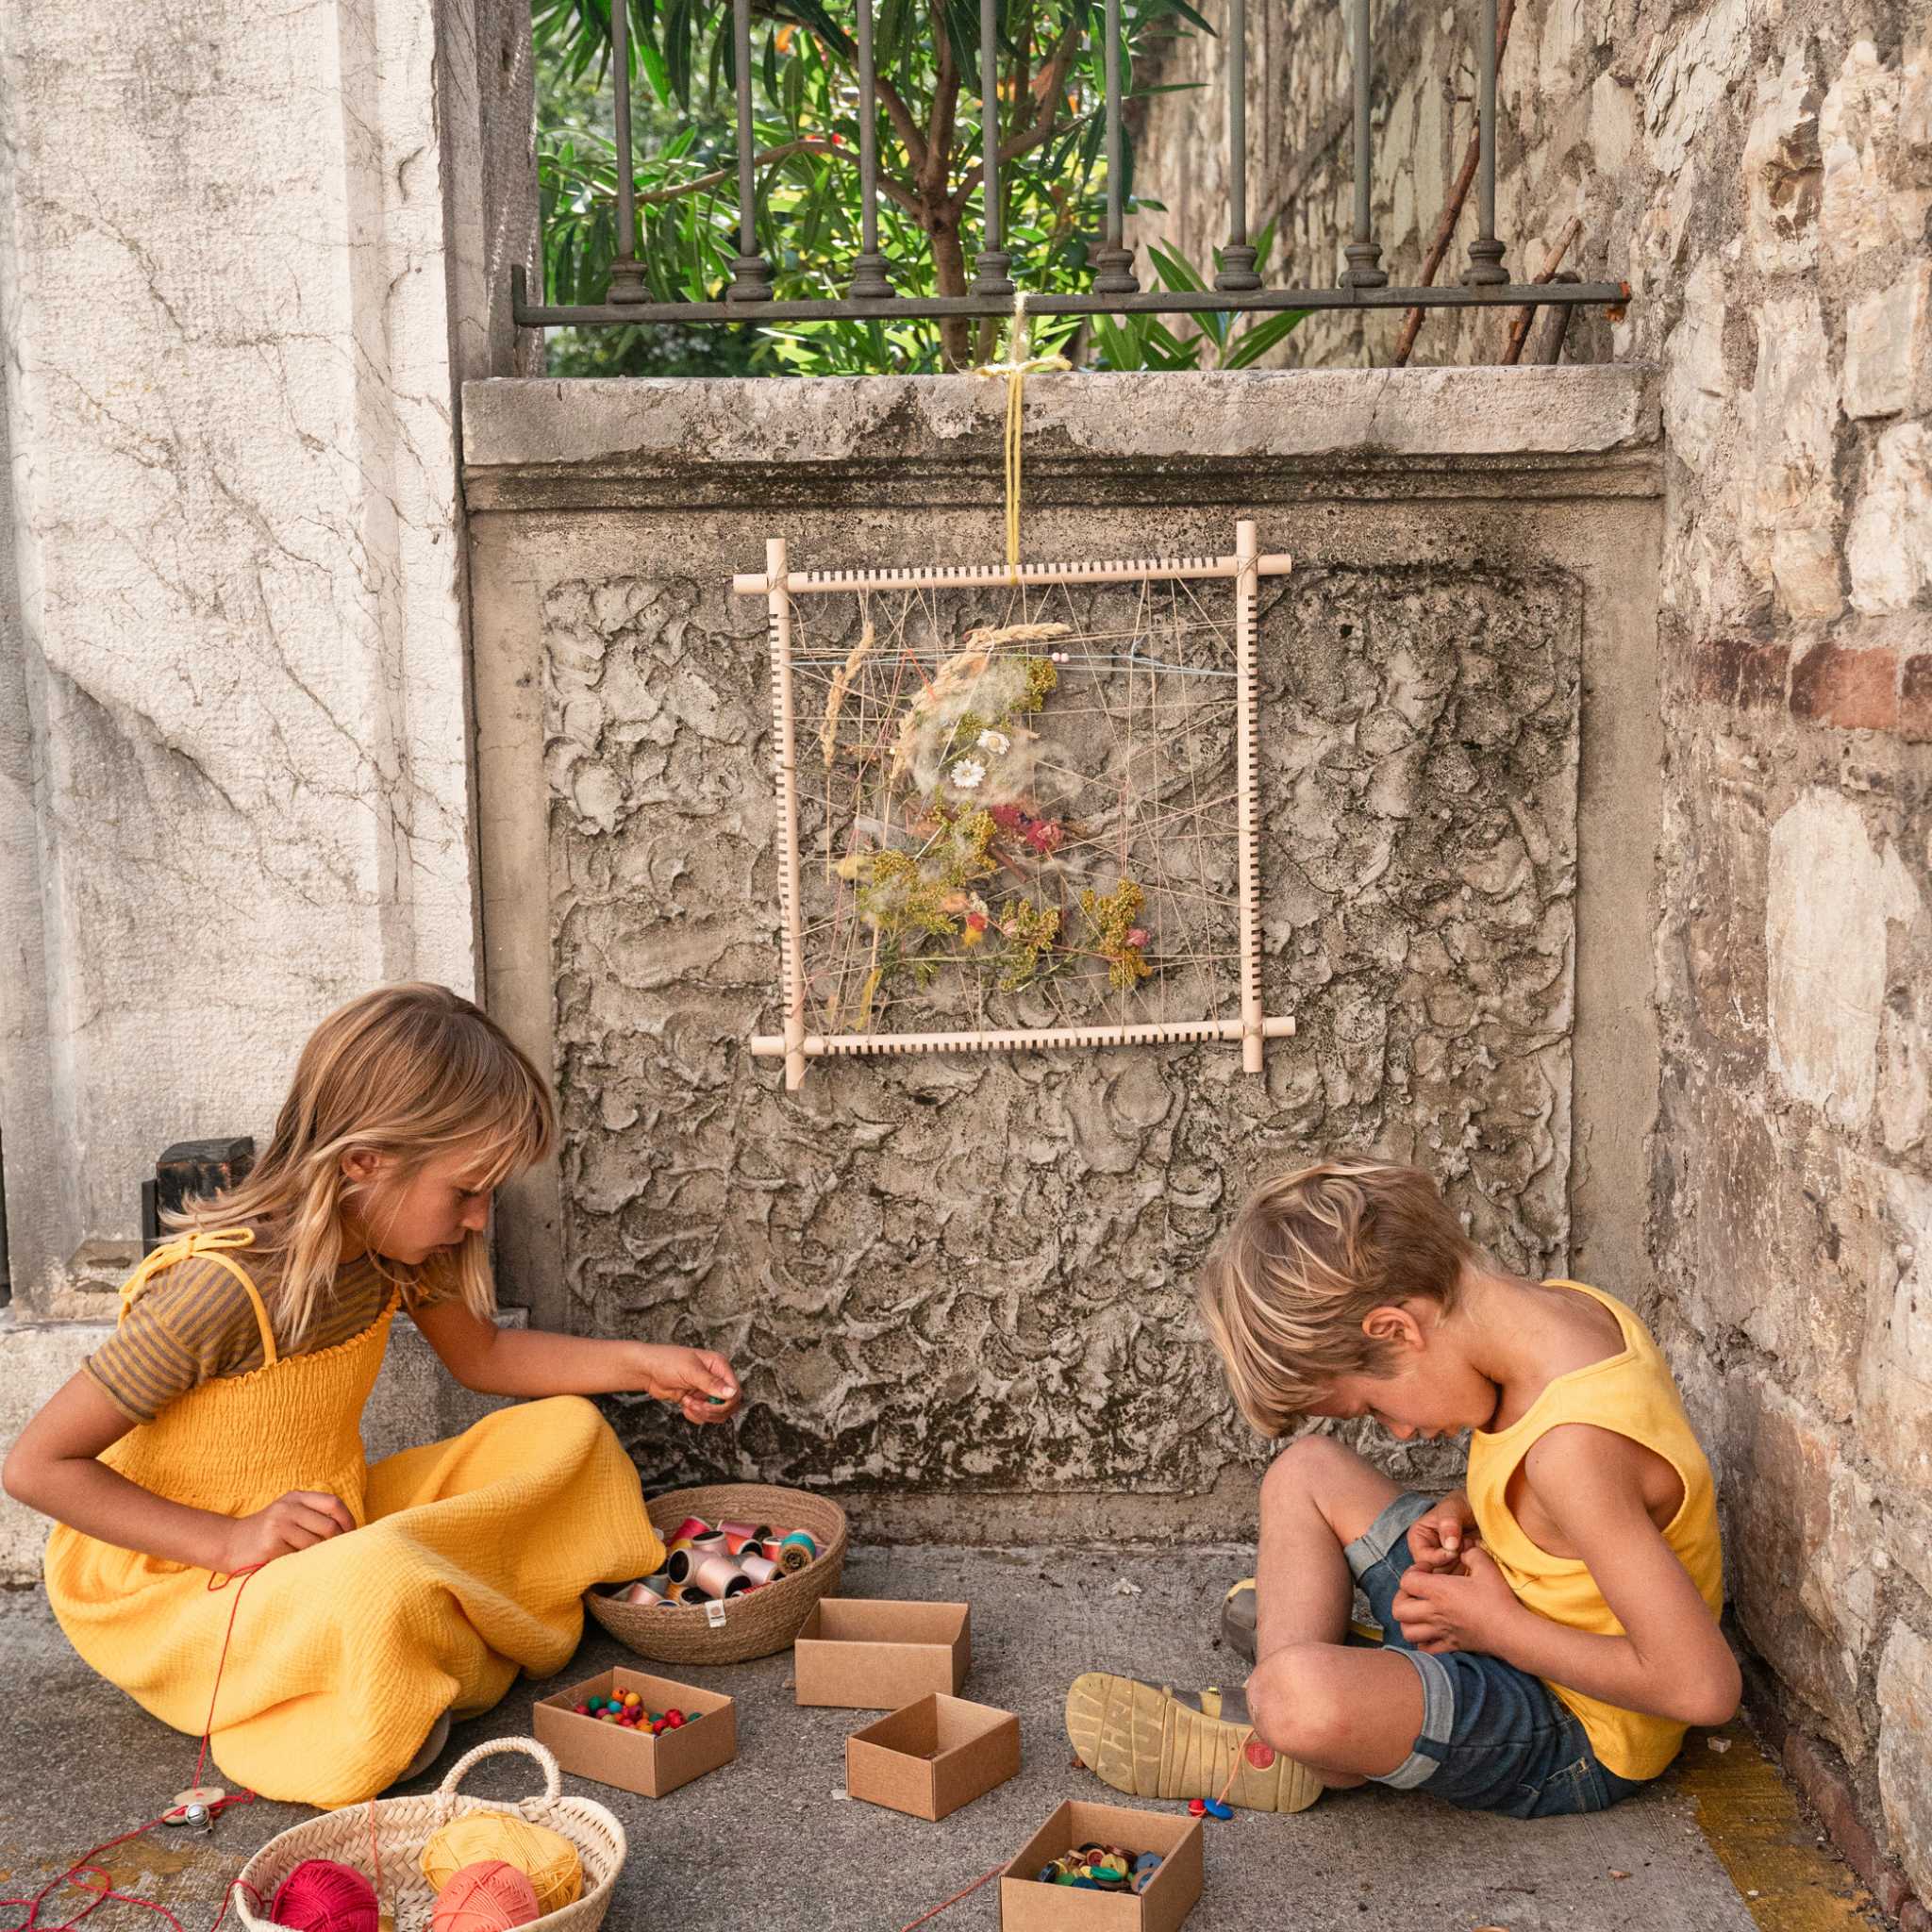 Children Playing With Grapat Weaving Frame